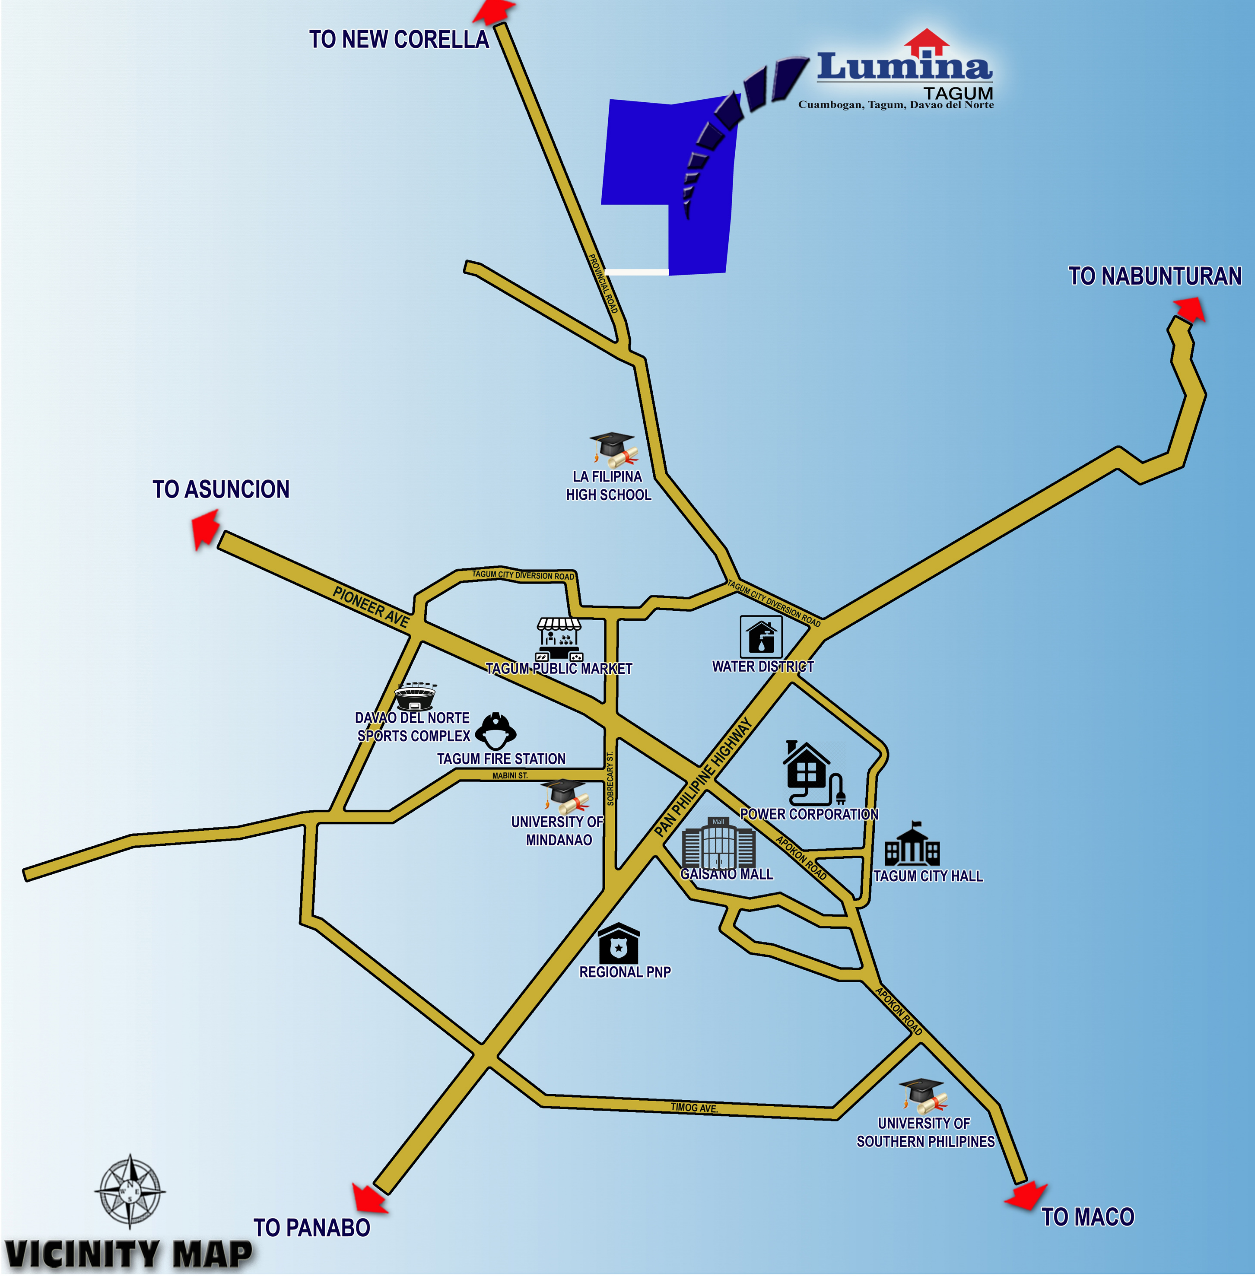 VICINITY-MAP-1636506994.png